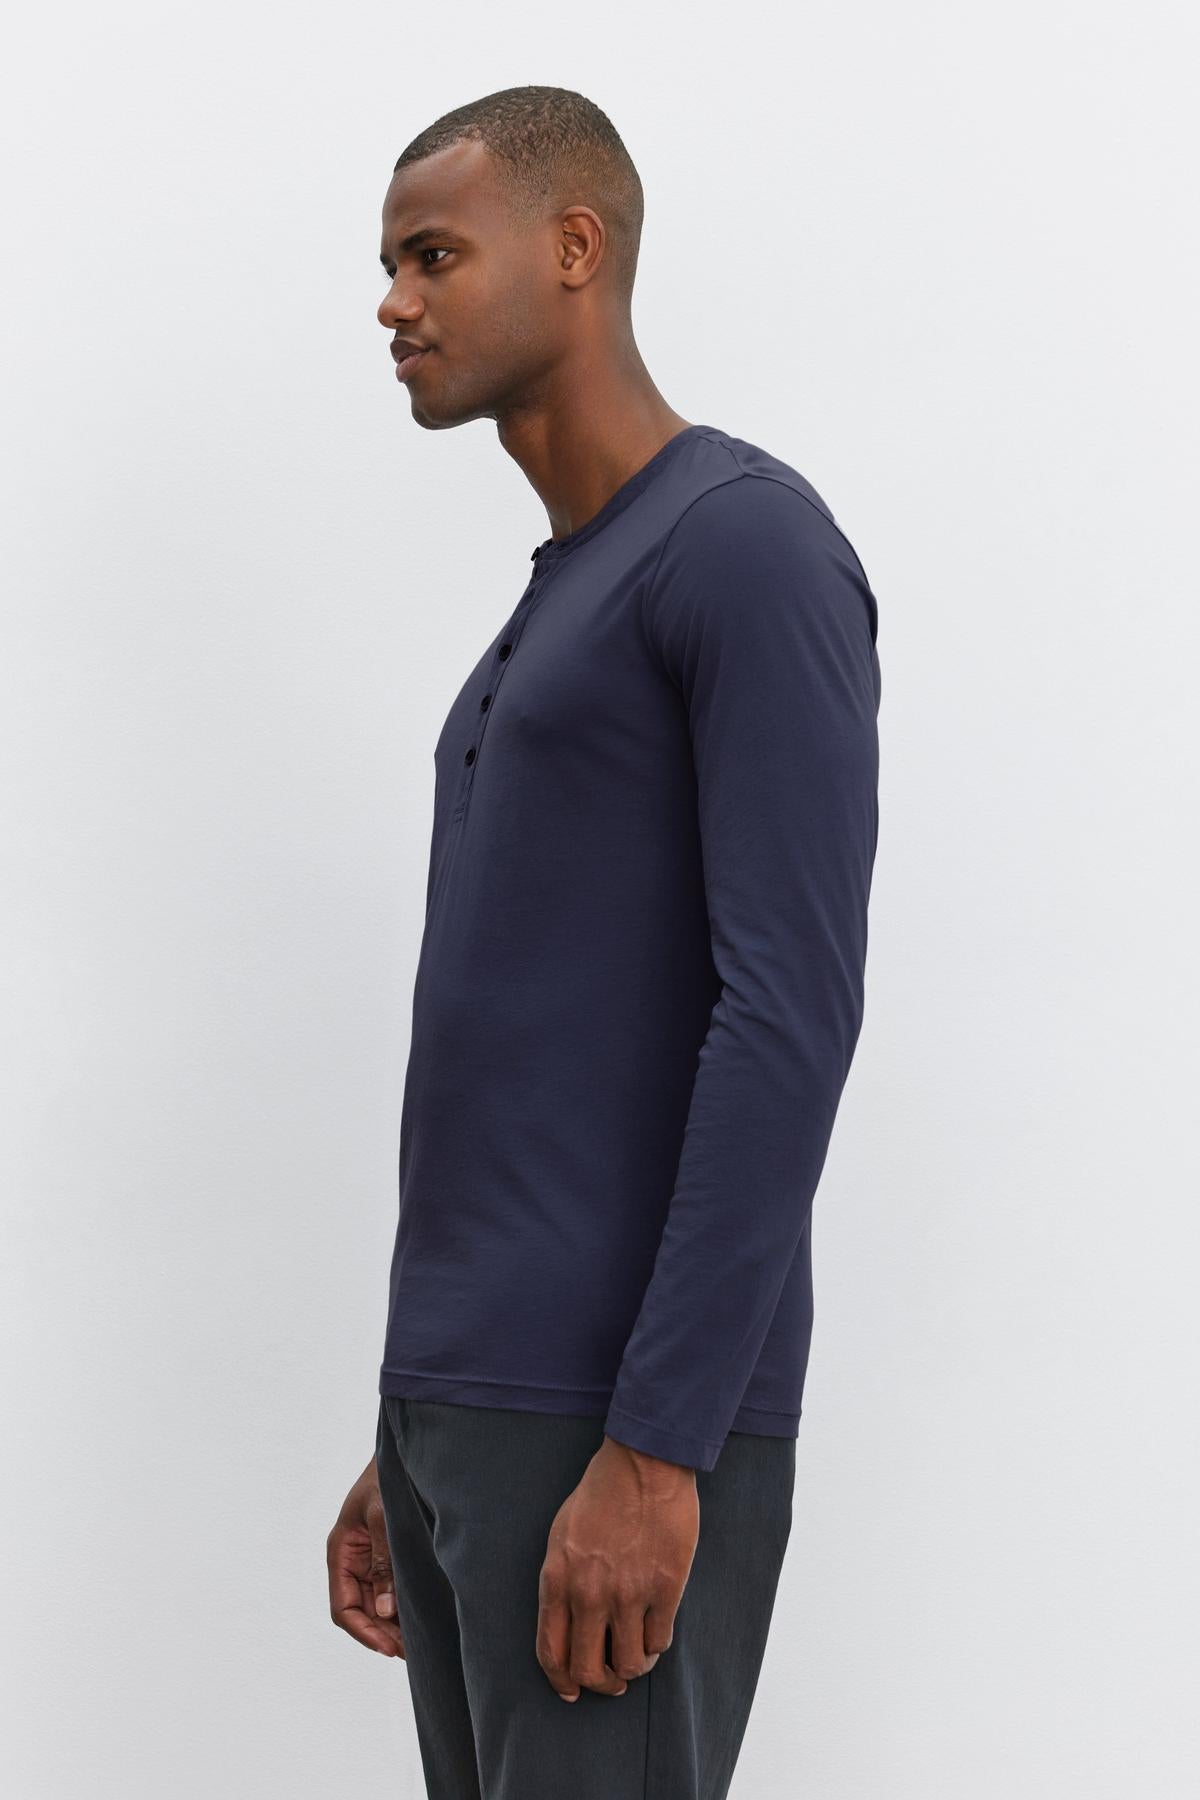 The man is wearing a lightweight navy ALVARO COTTON JERSEY HENLEY long-sleeved t-shirt by Velvet by Graham & Spencer.-36273890558145